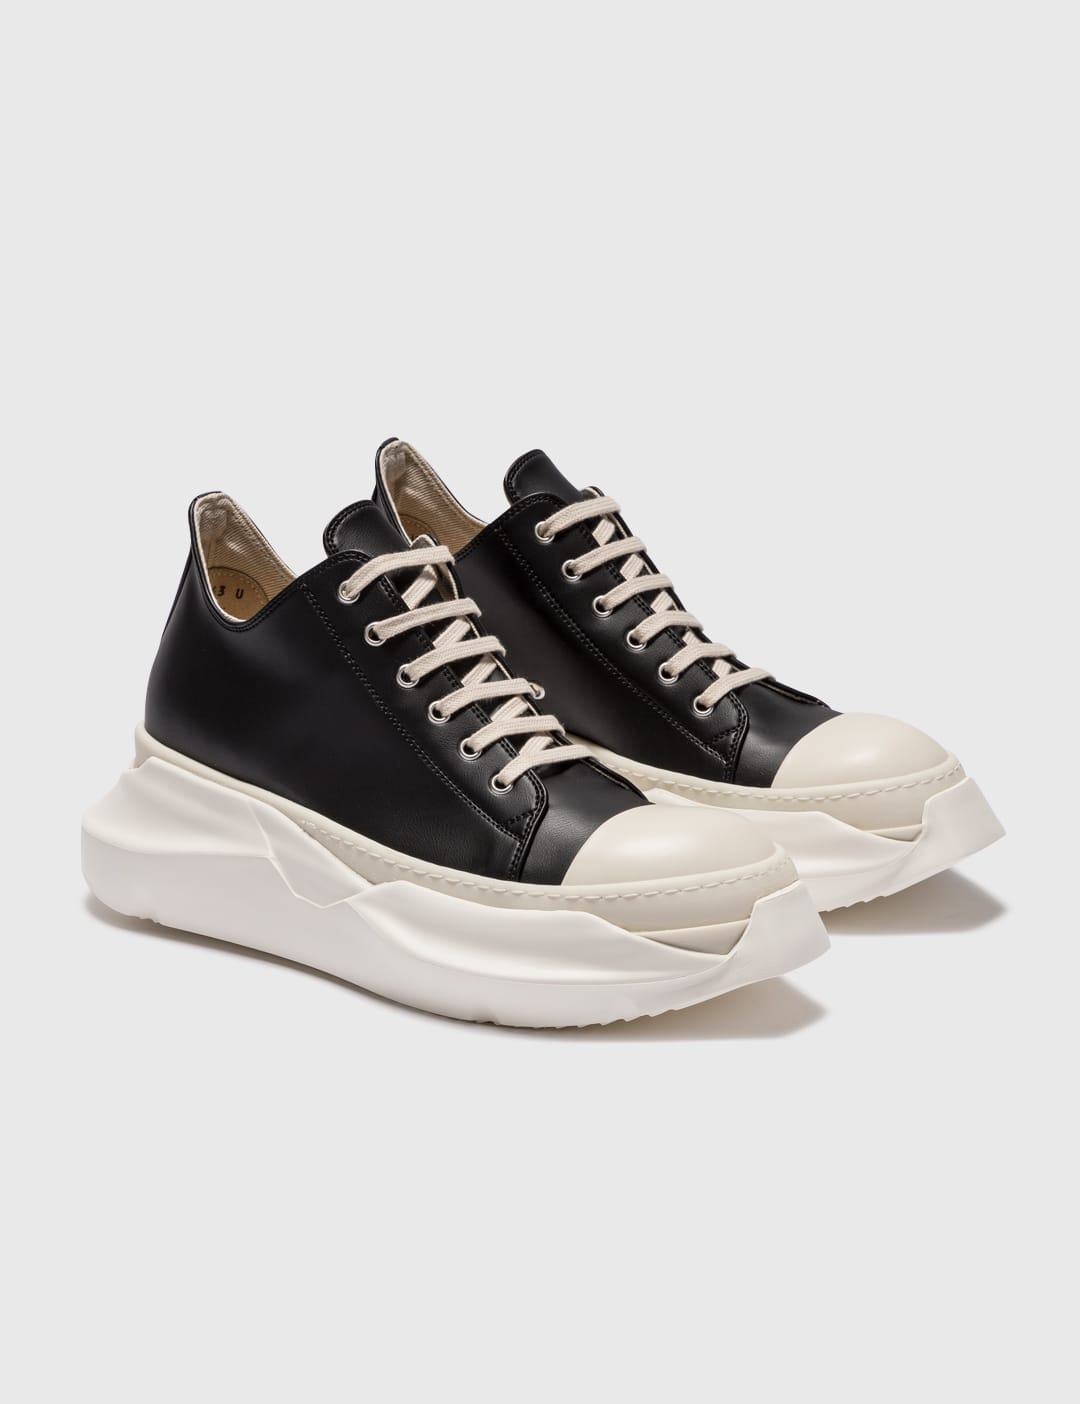 Rick Owens Drkshdw - Abstract Low Sneakers | HBX - Globally